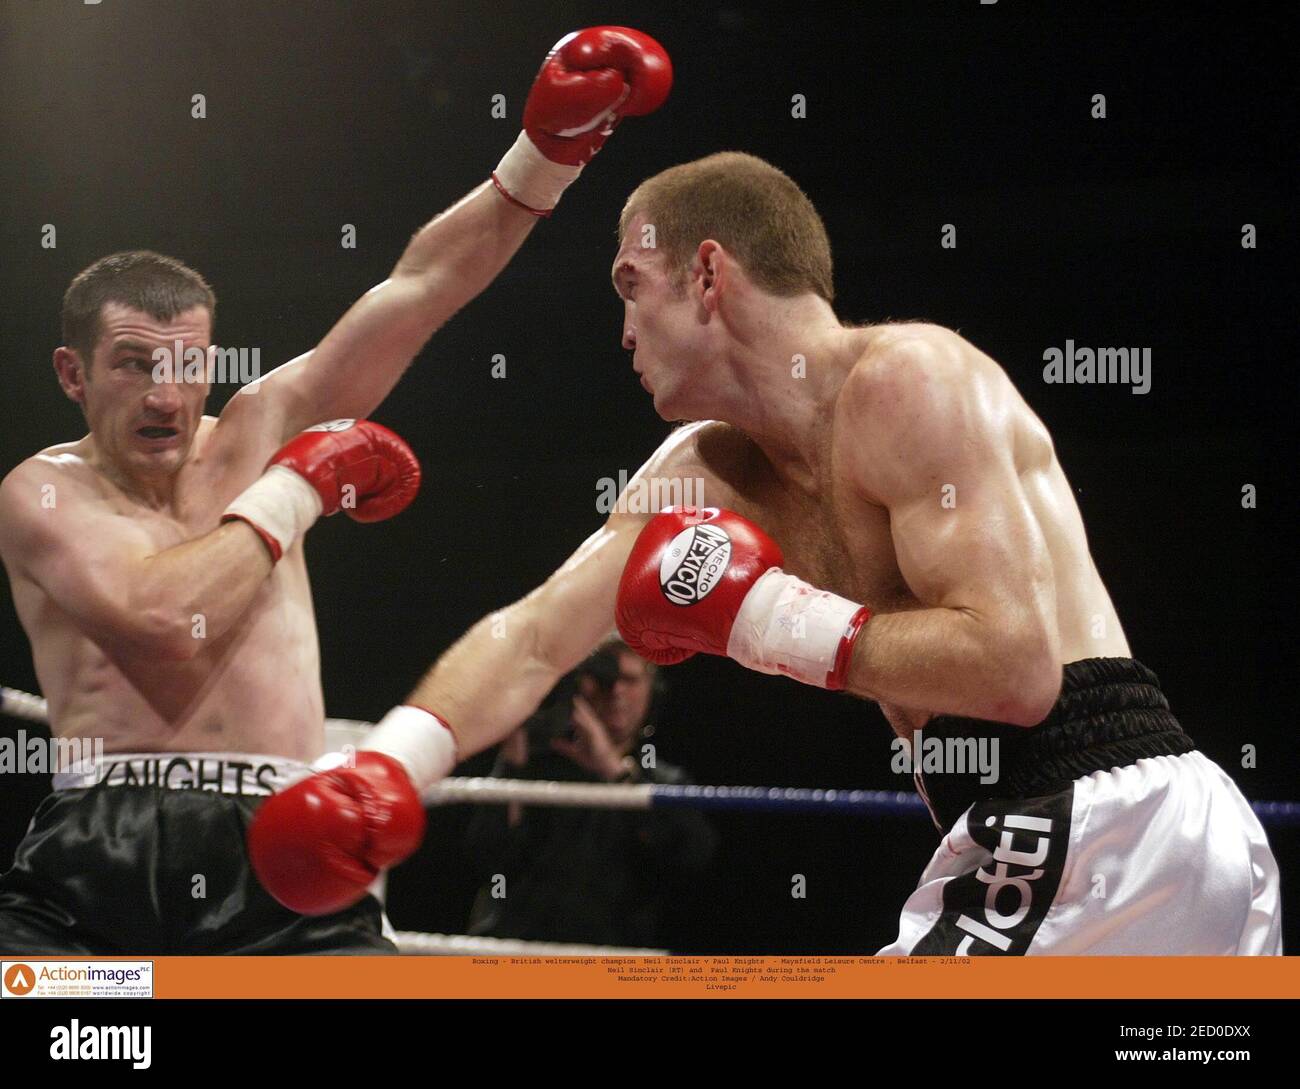 Boxing - British welterweight champion Neil Sinclair v Paul Knights -  Maysfield Leisure Centre , Belfast - 2/11/02